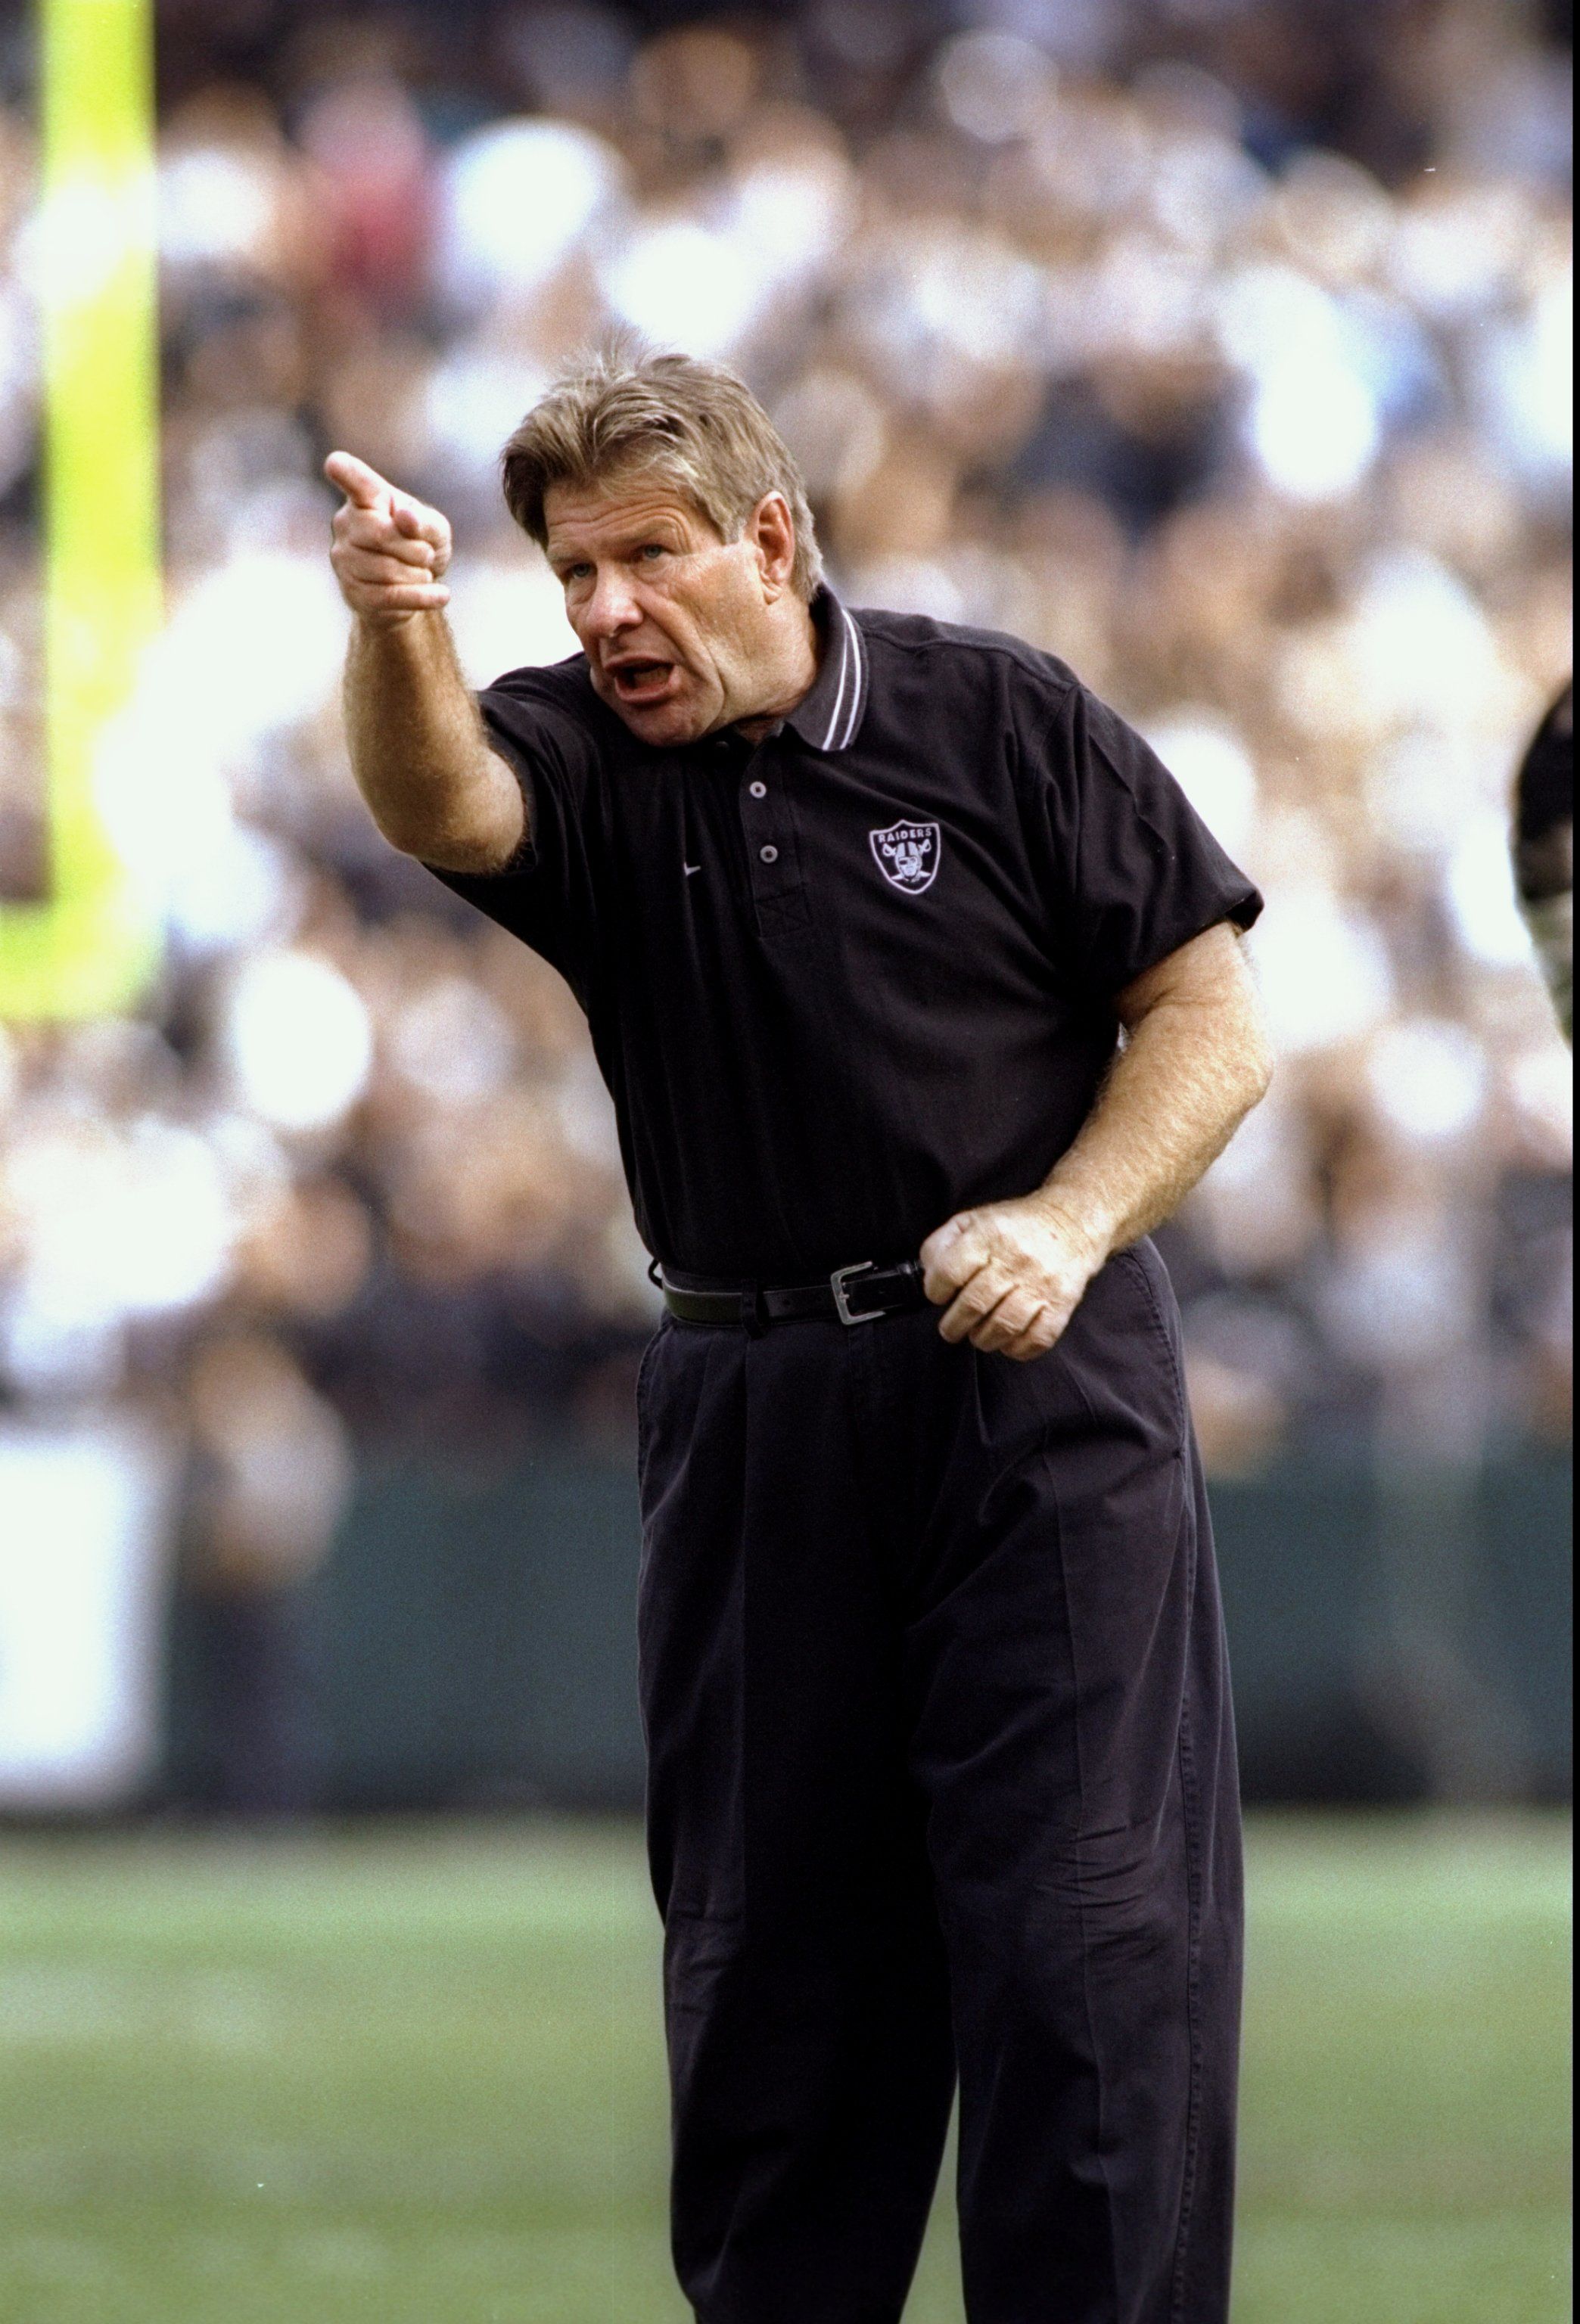 Joe Bugel gestures from the sidelines during a game of the Oakland Raiders against the Denver Broncos at the Oakland Alameda County Coliseum on October 19, 1997 | Photo: Getty Images